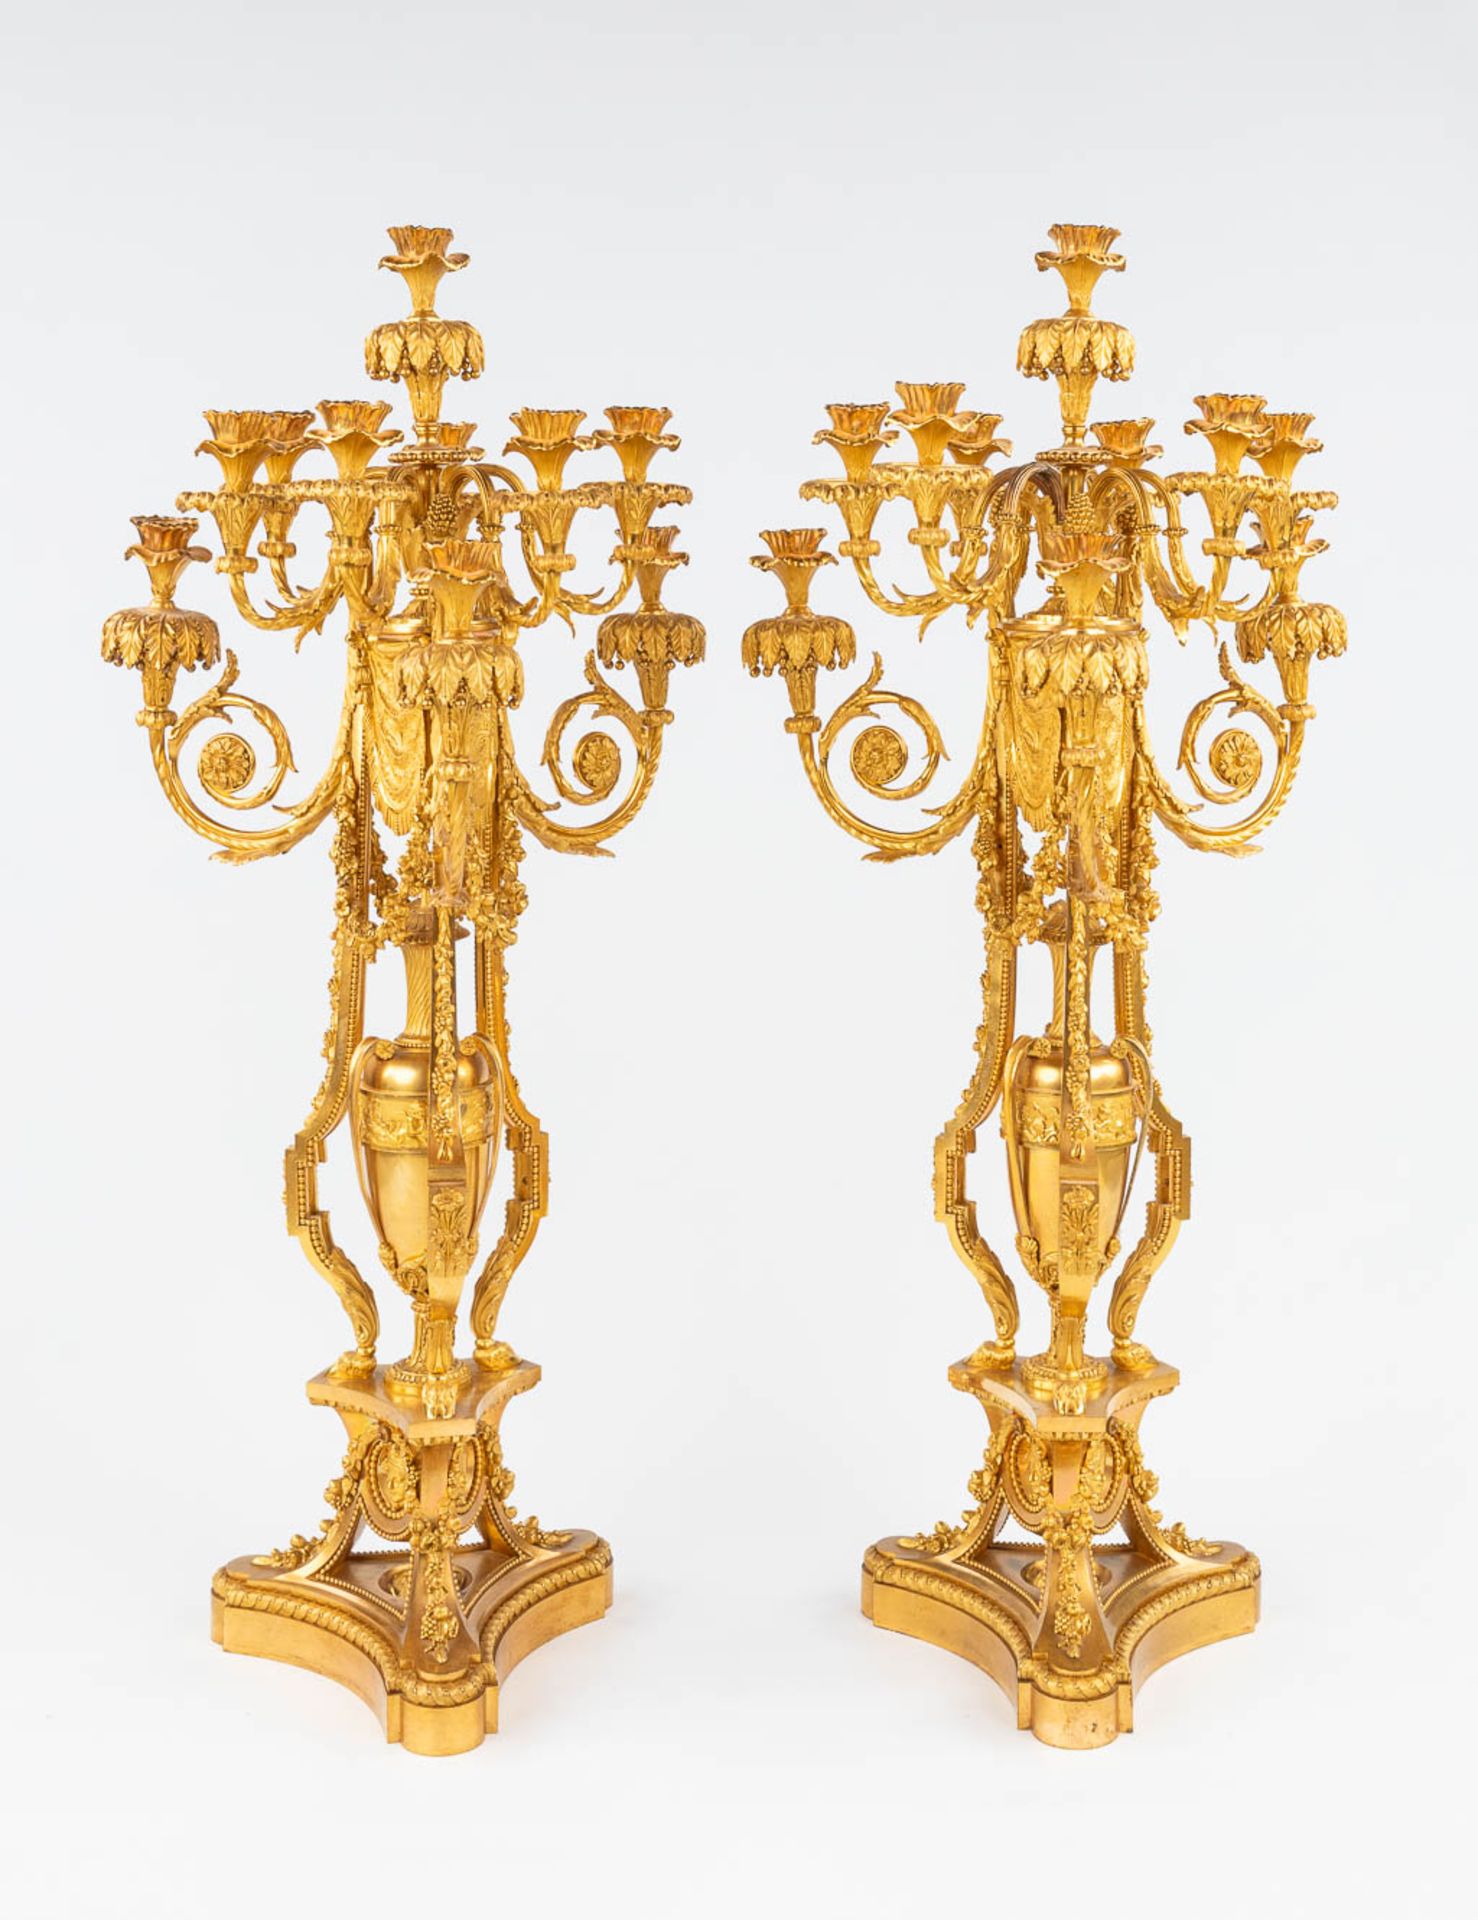 An imposing three-piece mantle garniture clock and candelabra, gilt bronze in Louis XVI style. Maiso - Image 25 of 38